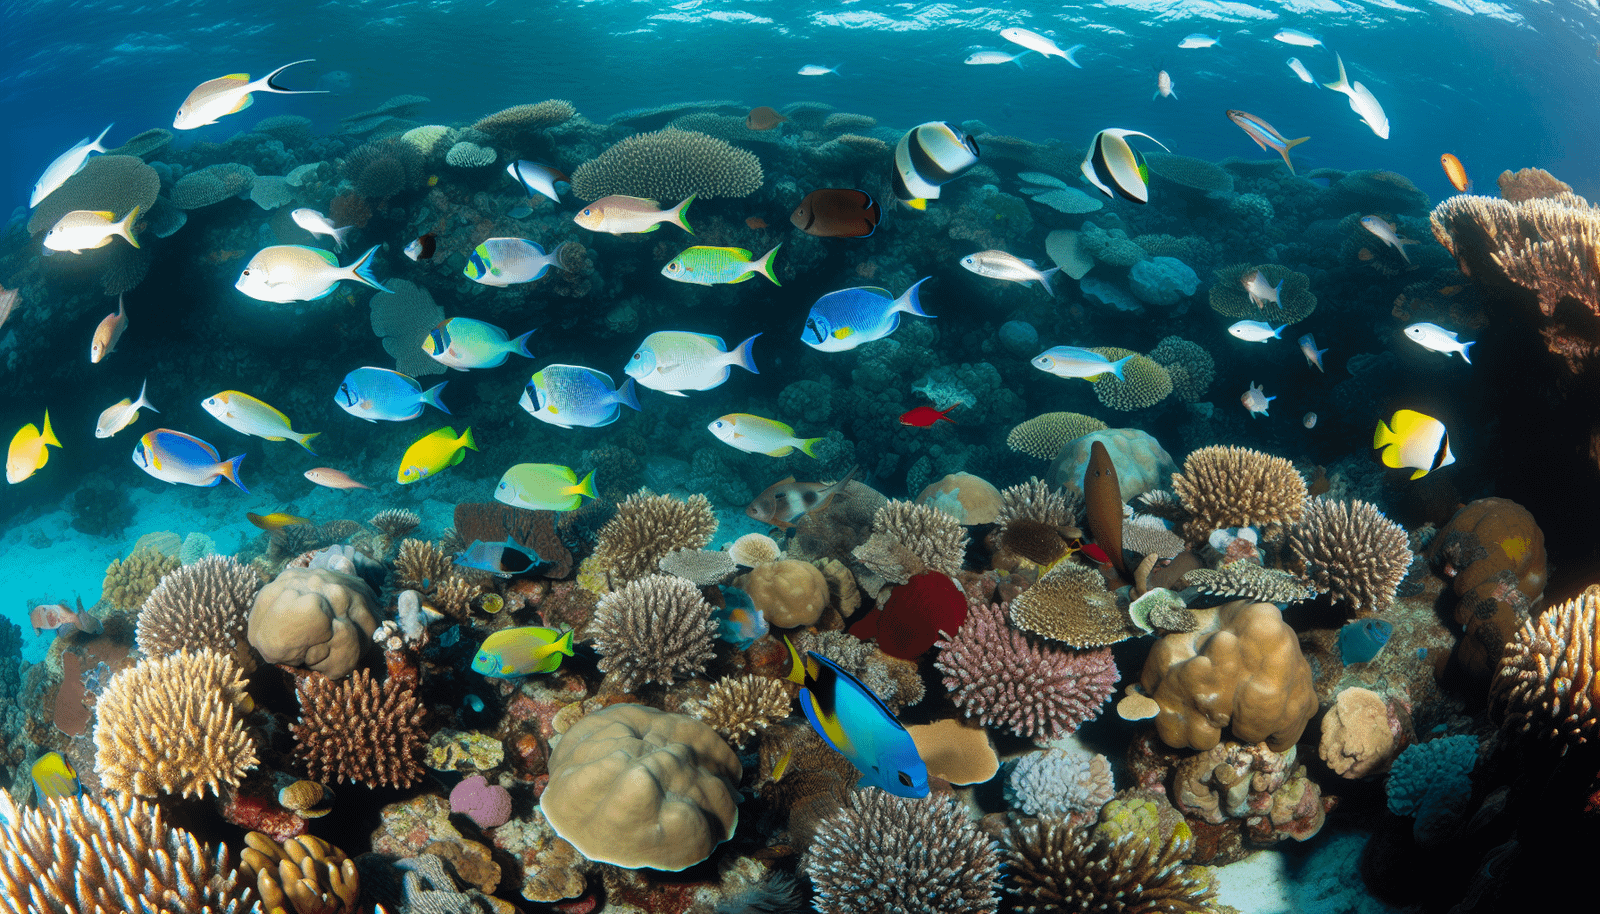 Colorful tropical fish swimming among coral reefs in warm tropical waters